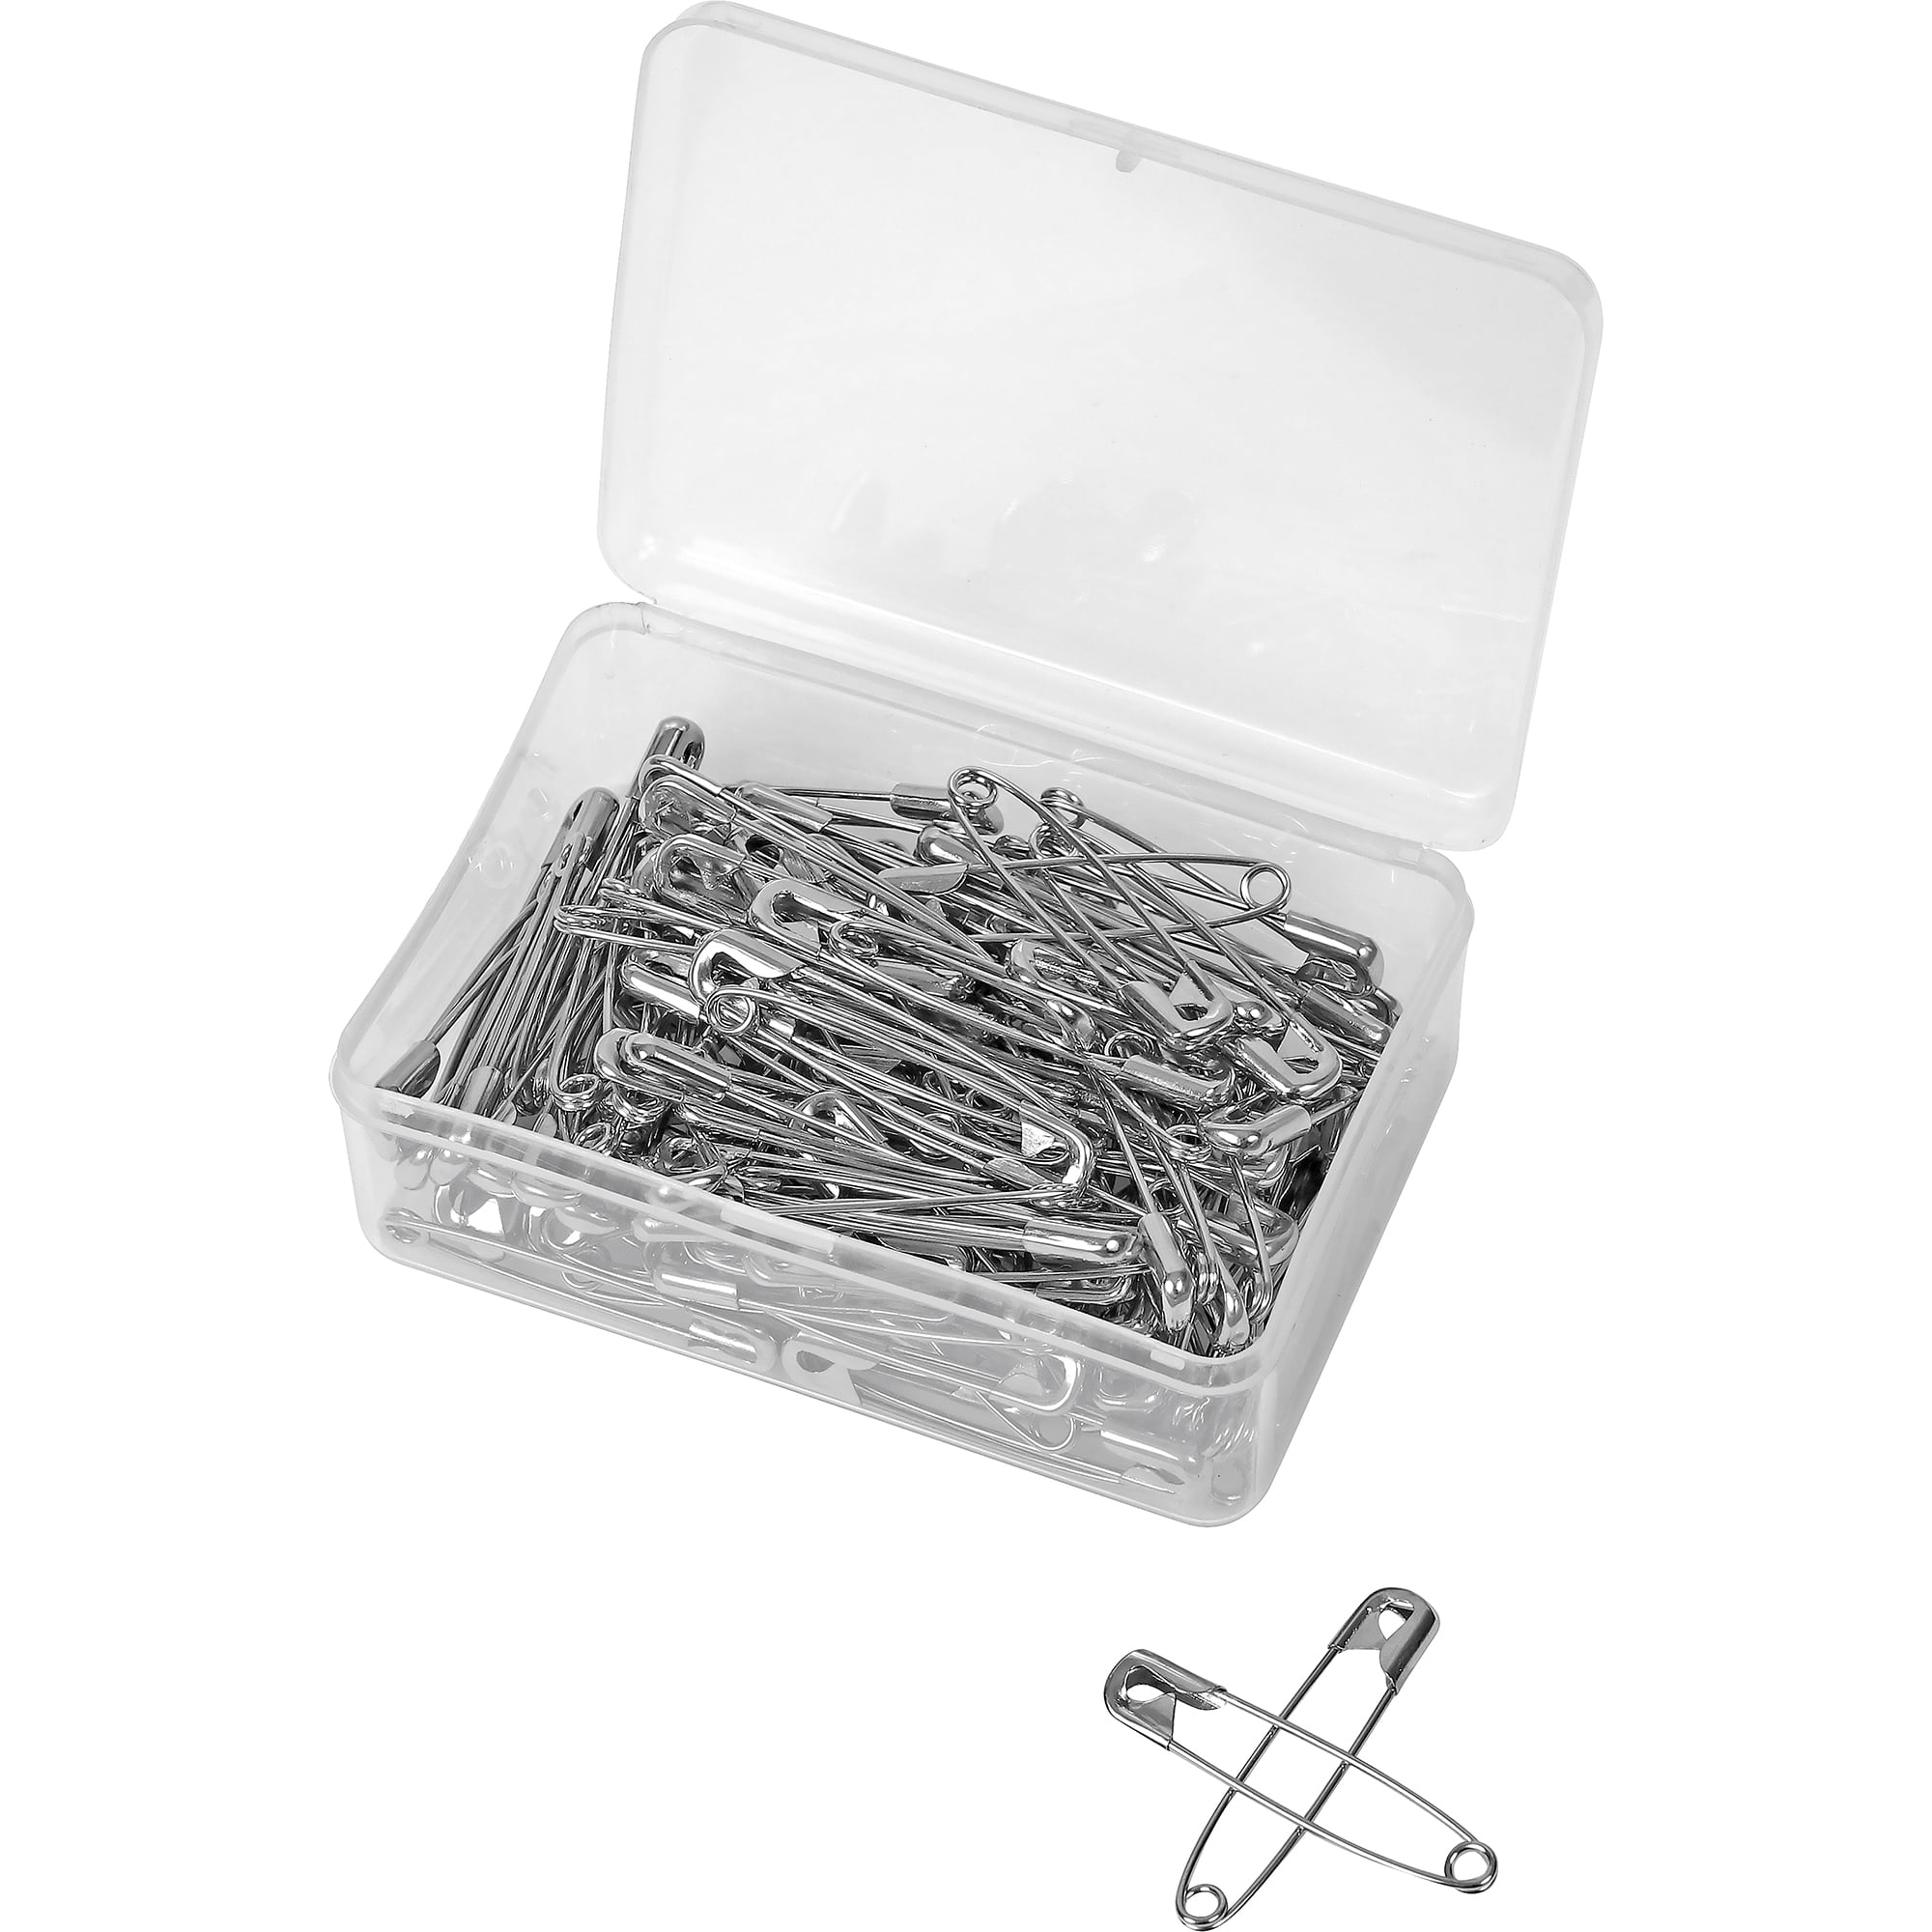 100PCS-2.2In Safety Pins,Stainless Steel Safety Pins,Safety Pins Bulk Metal  Silver Sewing Pins Clothing Clips Tool 55mm Decorative Safety pins